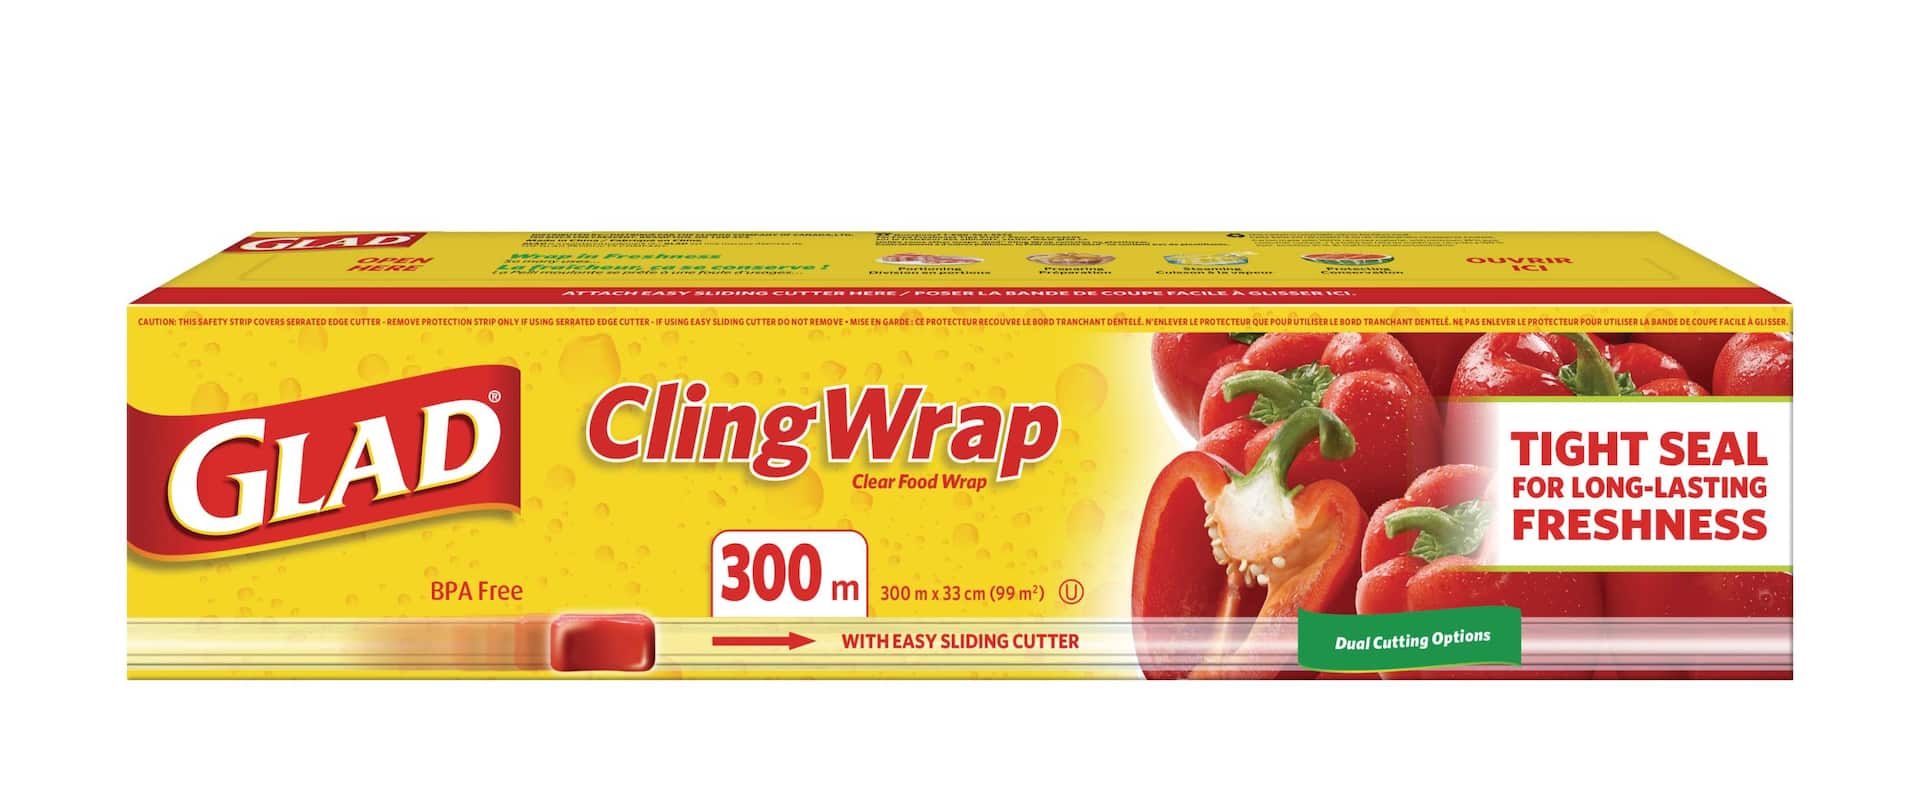 https://media-www.canadiantire.ca/product/living/home-essentials/household-consumables/1531004/glad-cling-wrap-300-metres-73f31bc5-9cdb-4c44-ba71-e9b967fef718-jpgrendition.jpg